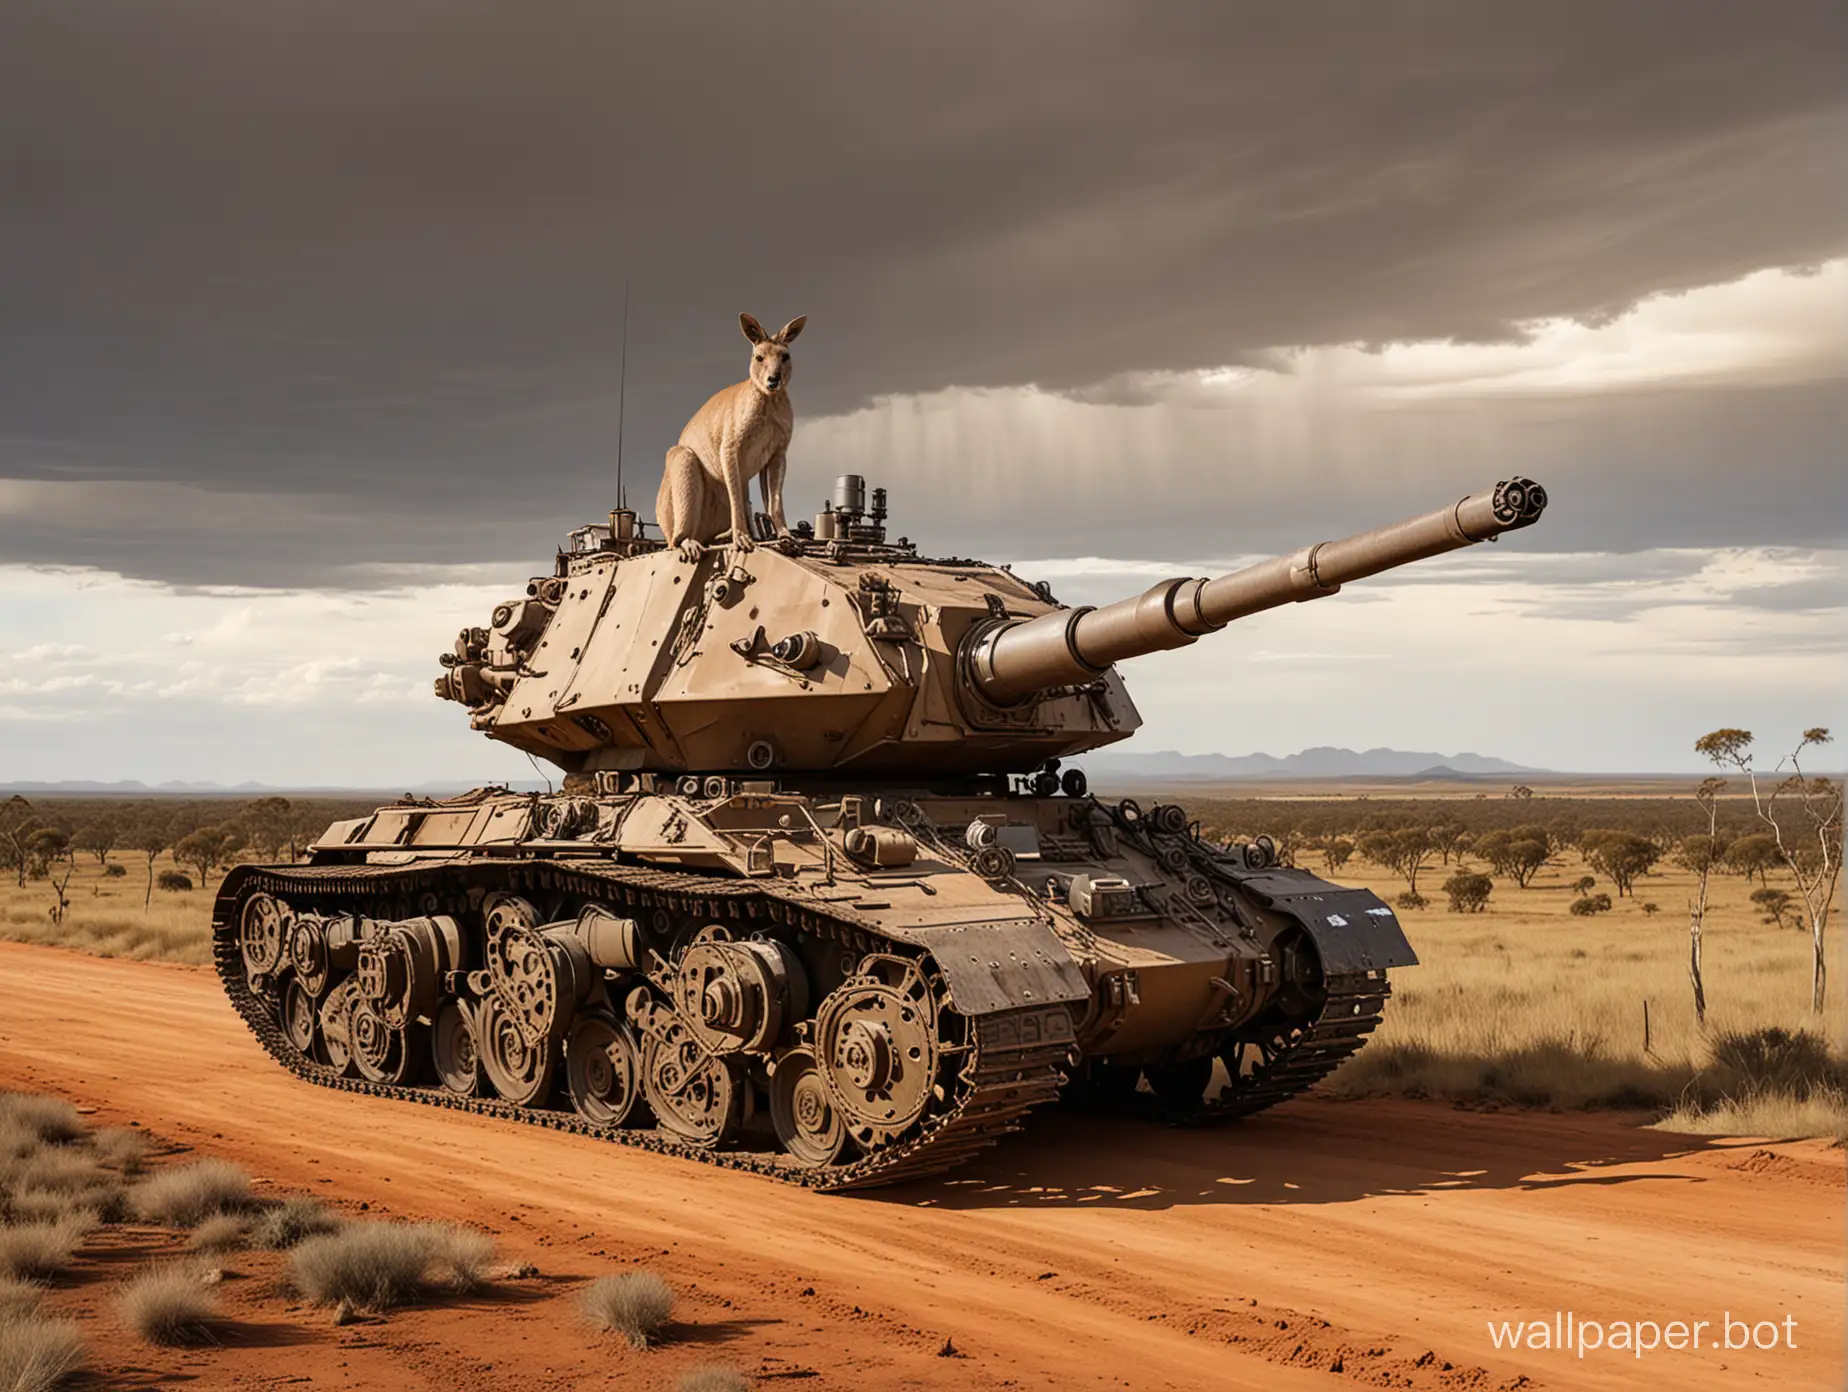 Tank-kangaroo with huge mechanical paws and a long tail against the backdrop of the Australian landscape.